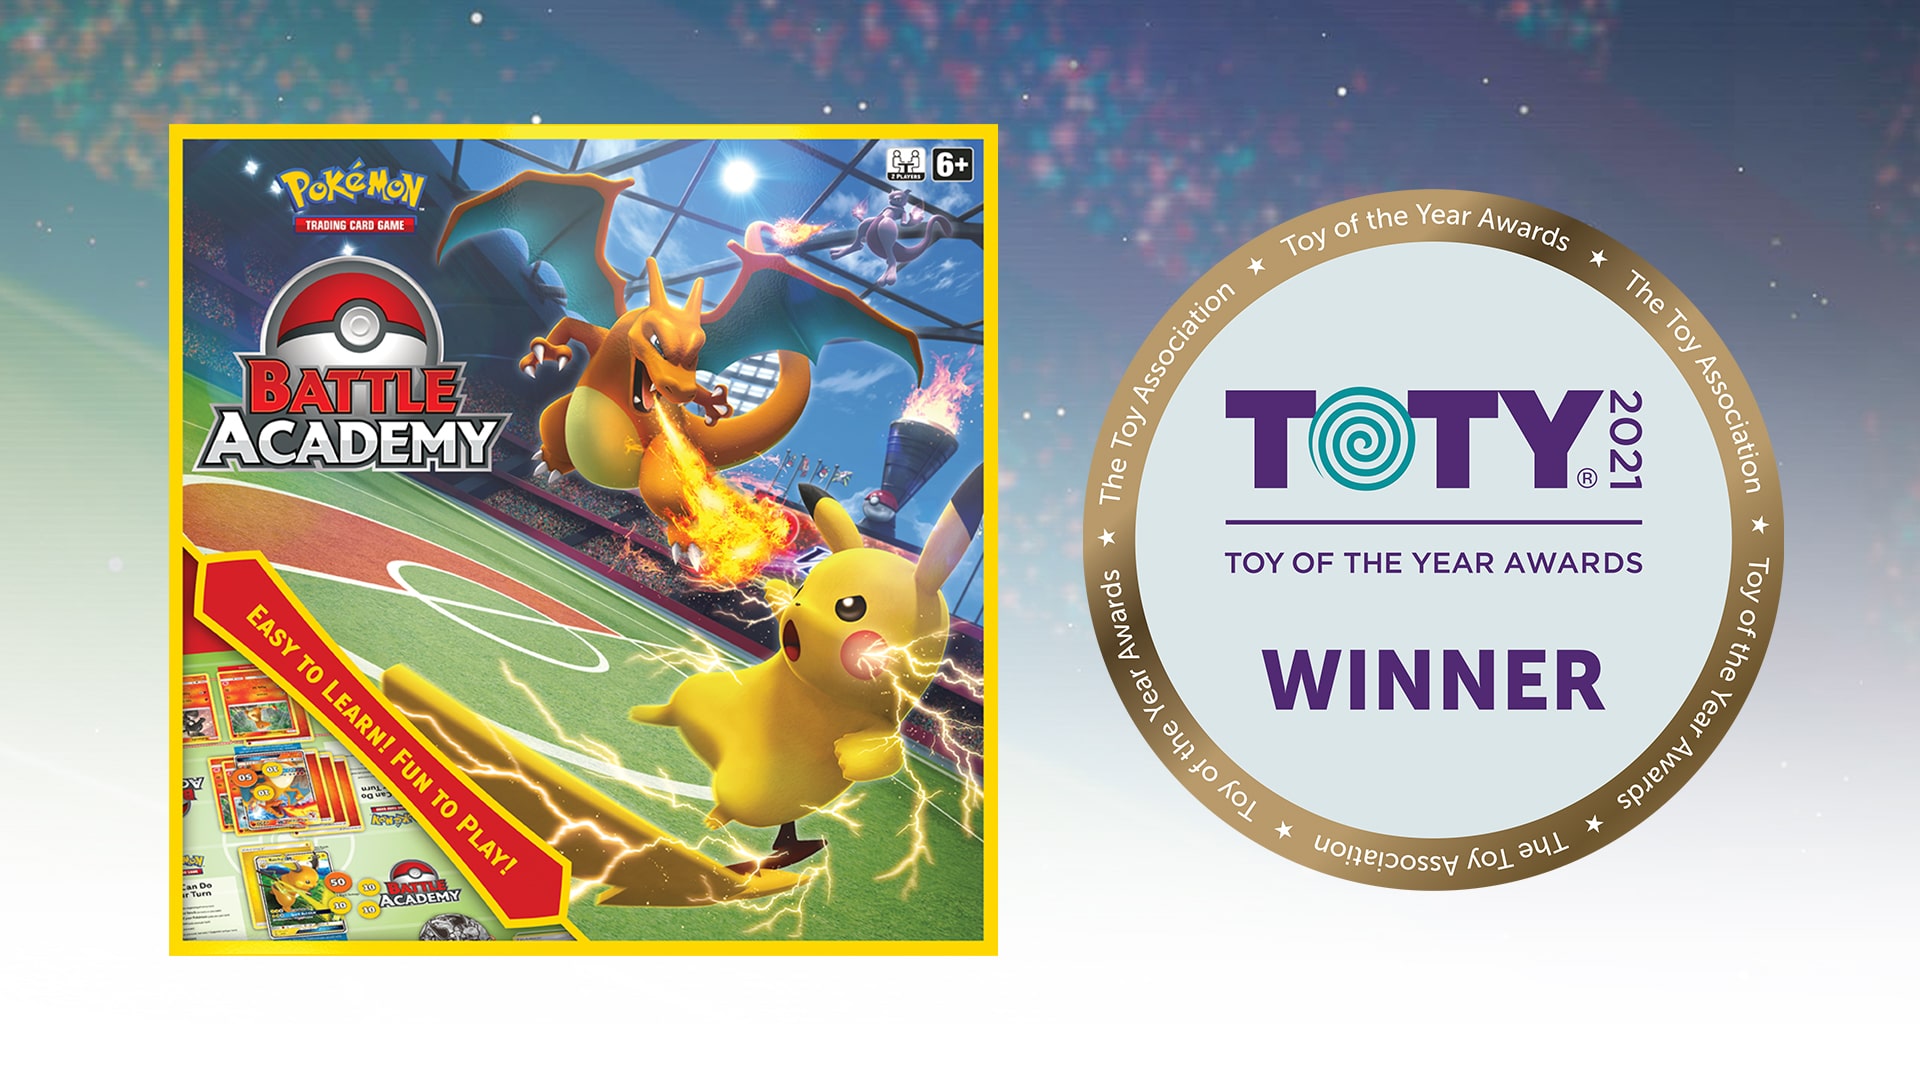 Pokémon Trading Card Game Battle Academy benoemd tot Game of the Year